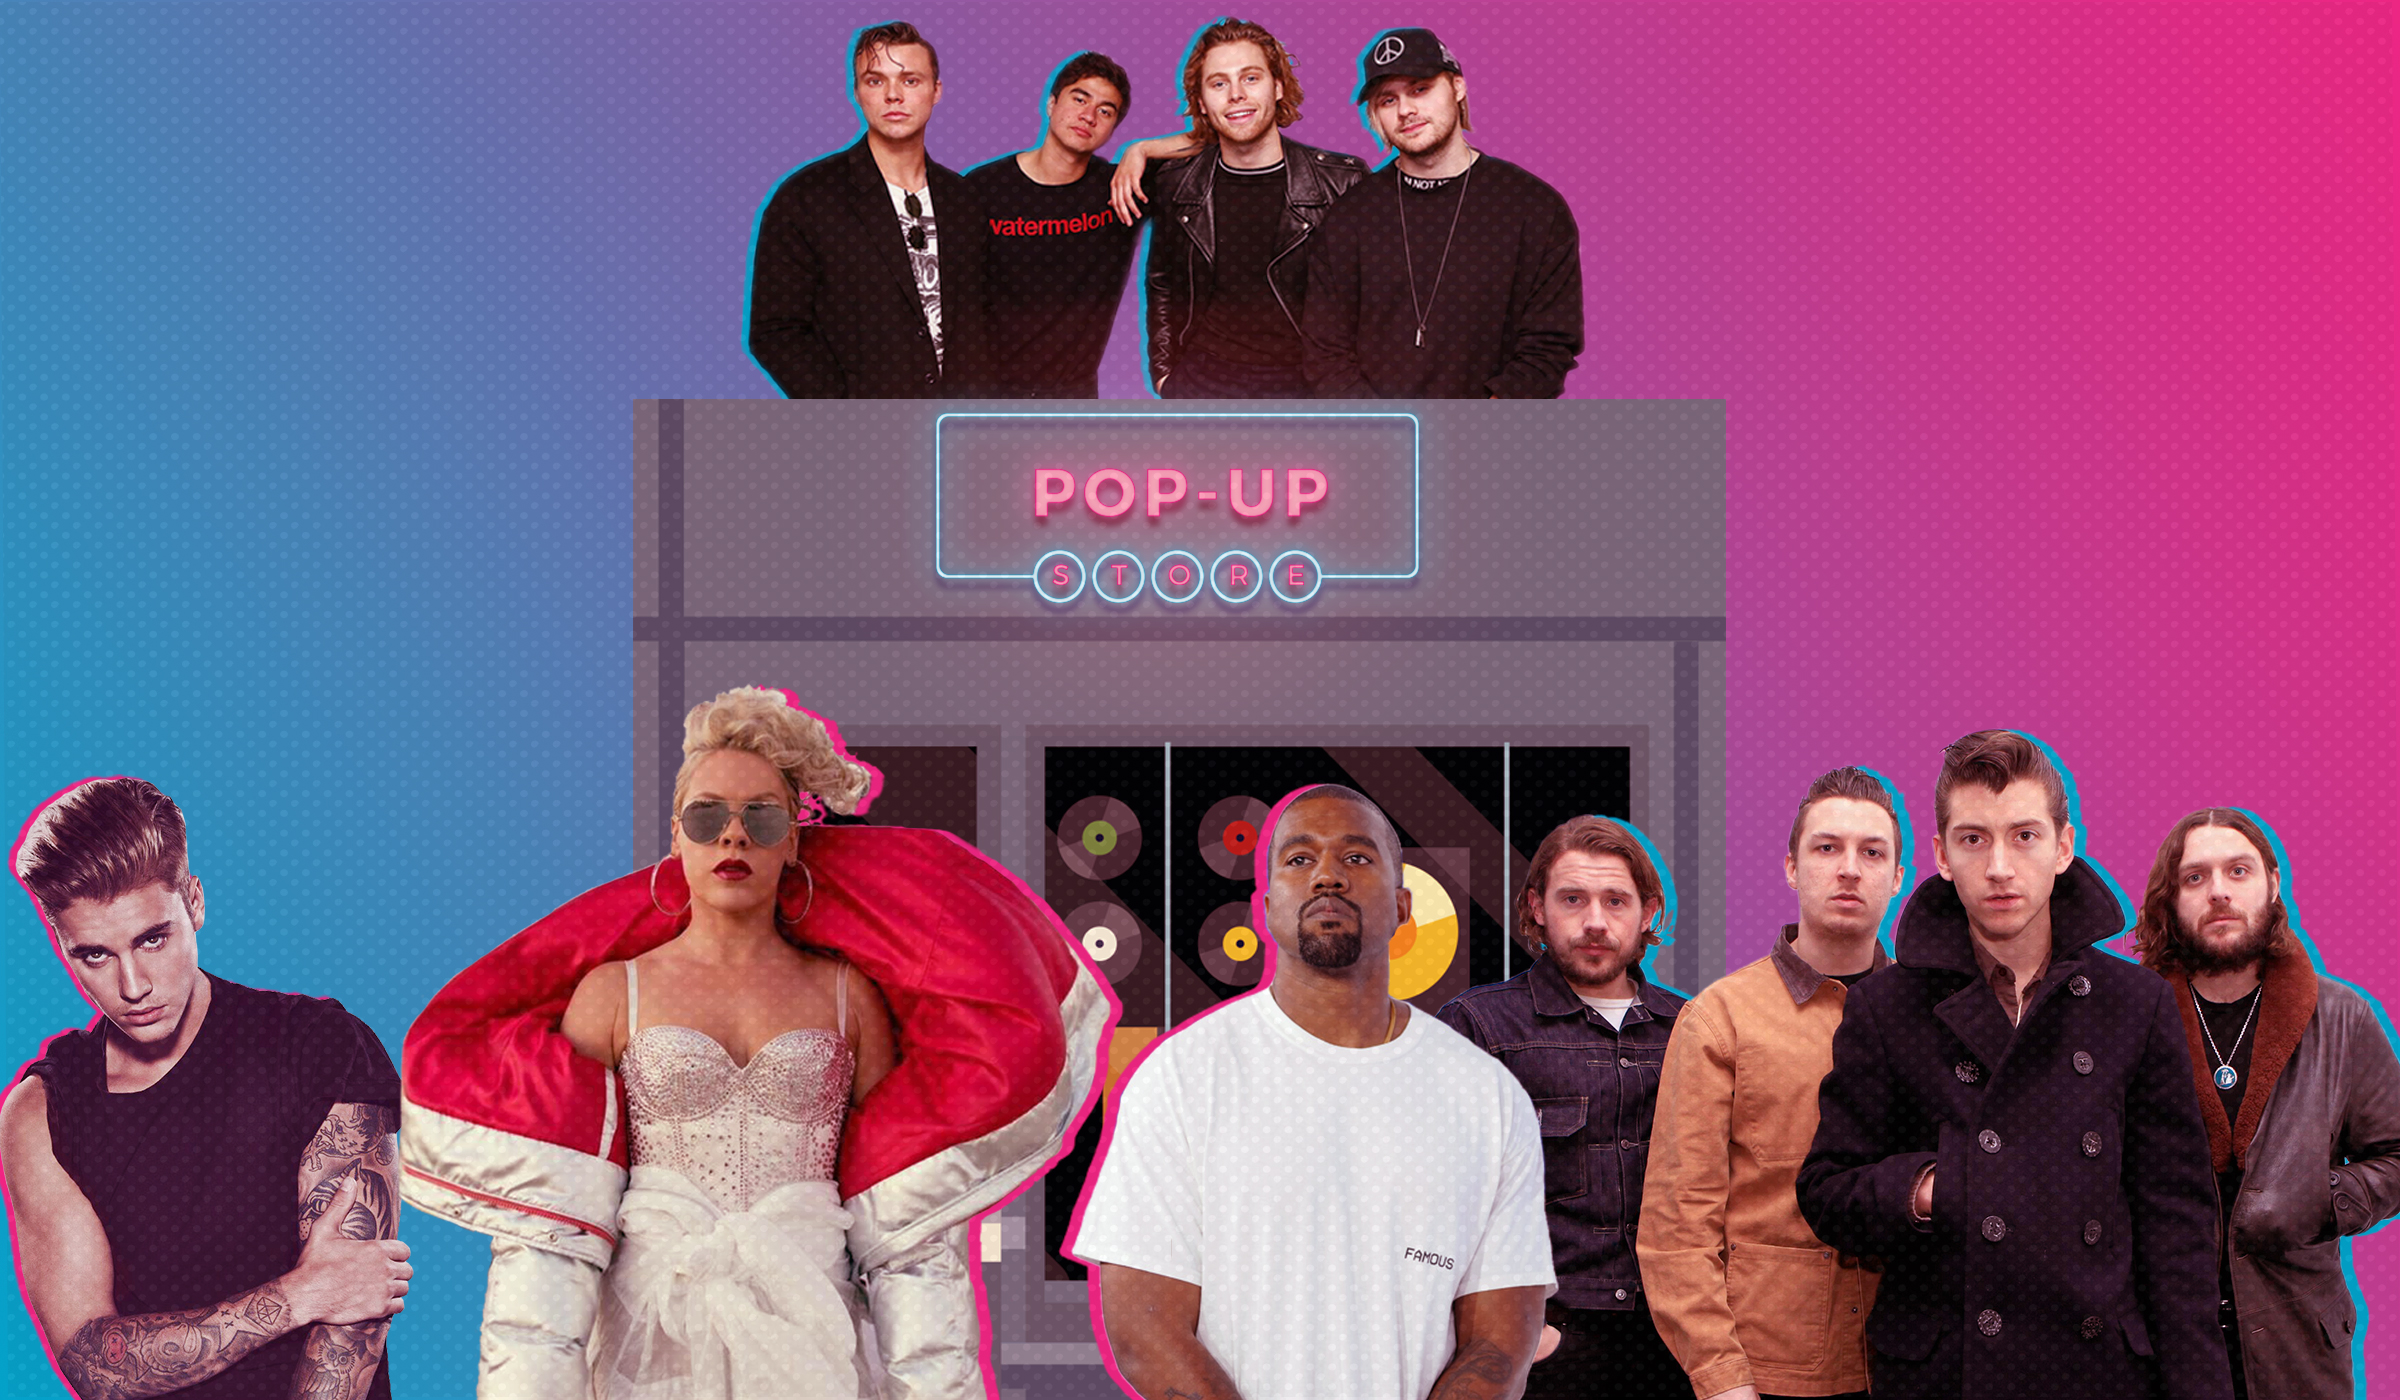 How to harness the power of the pop-up according to music’s merch wizards